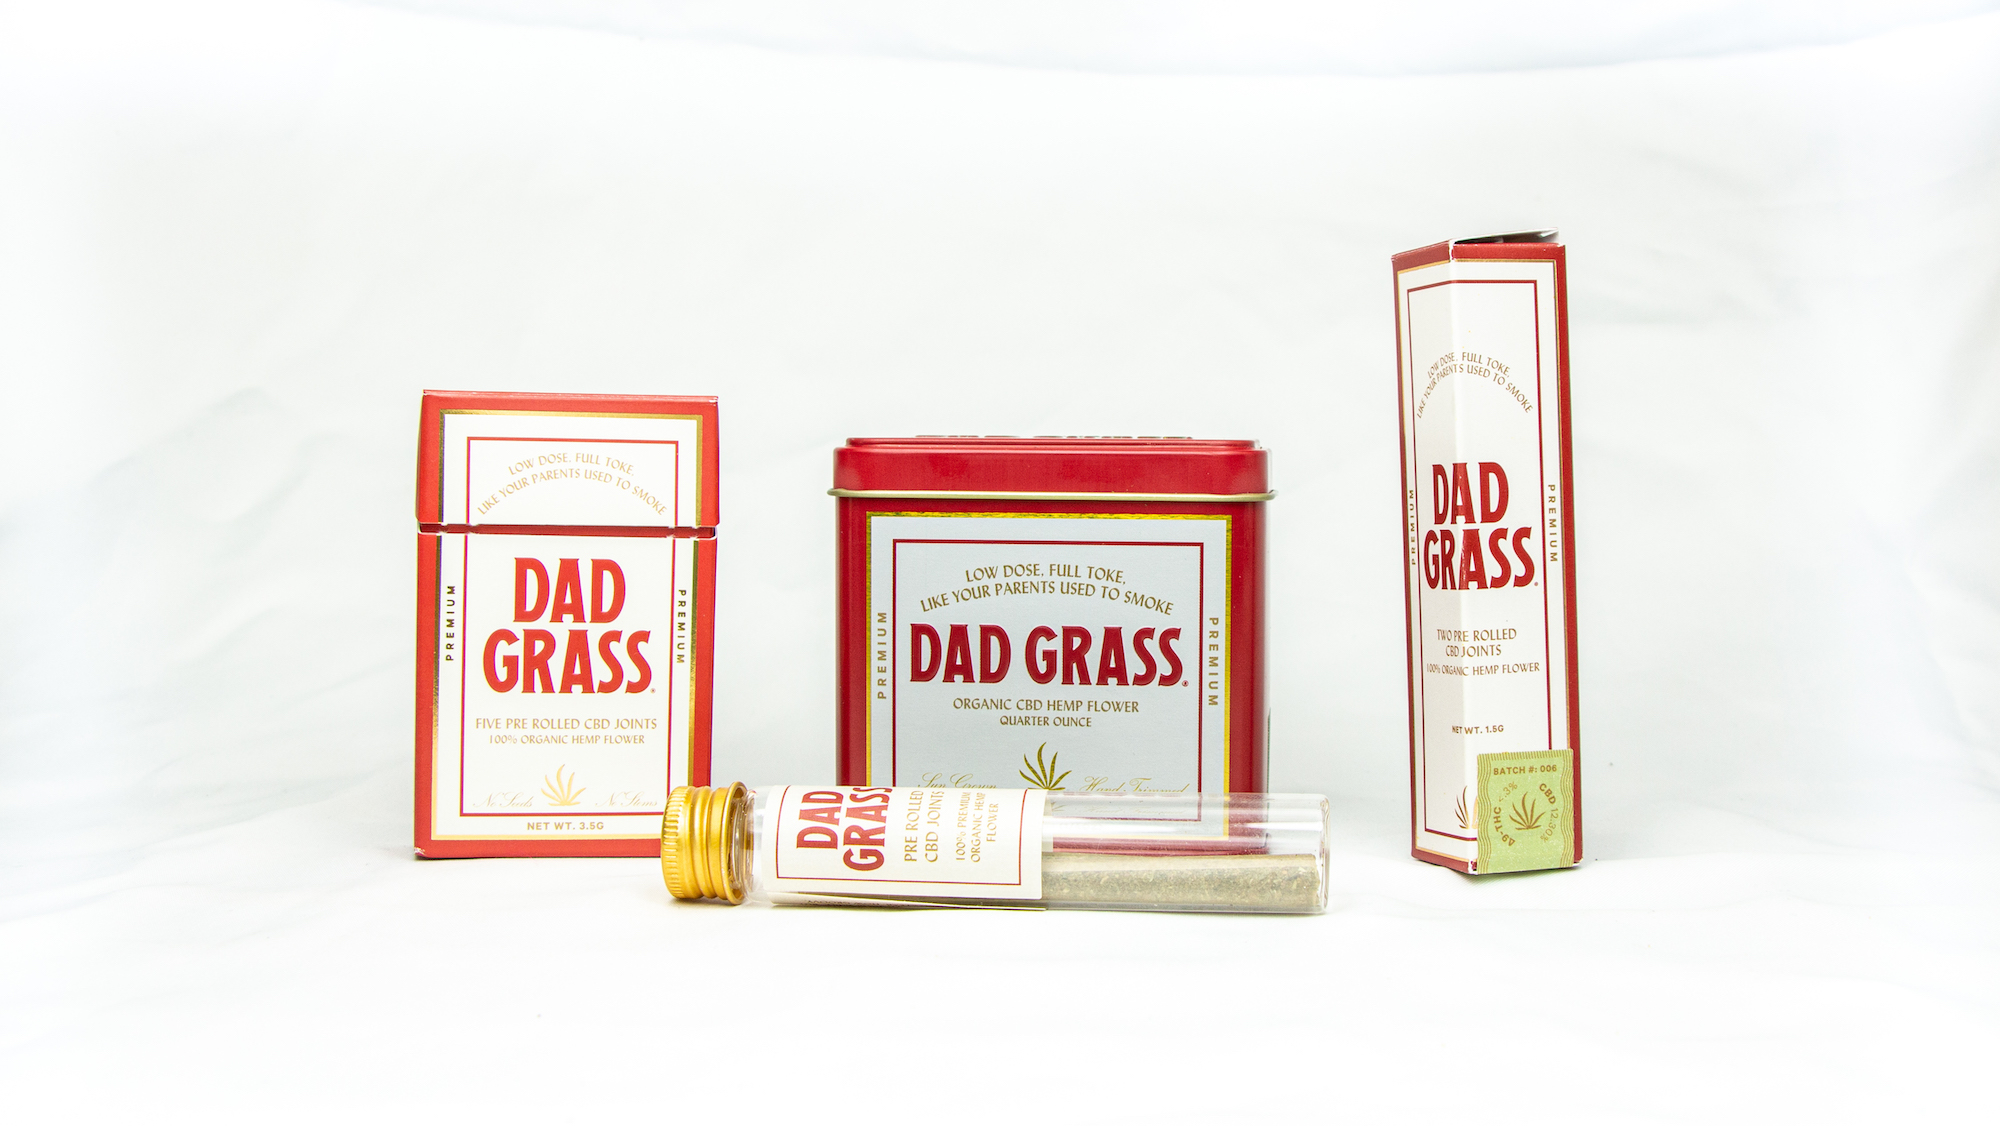 Dad Grass CBD products review